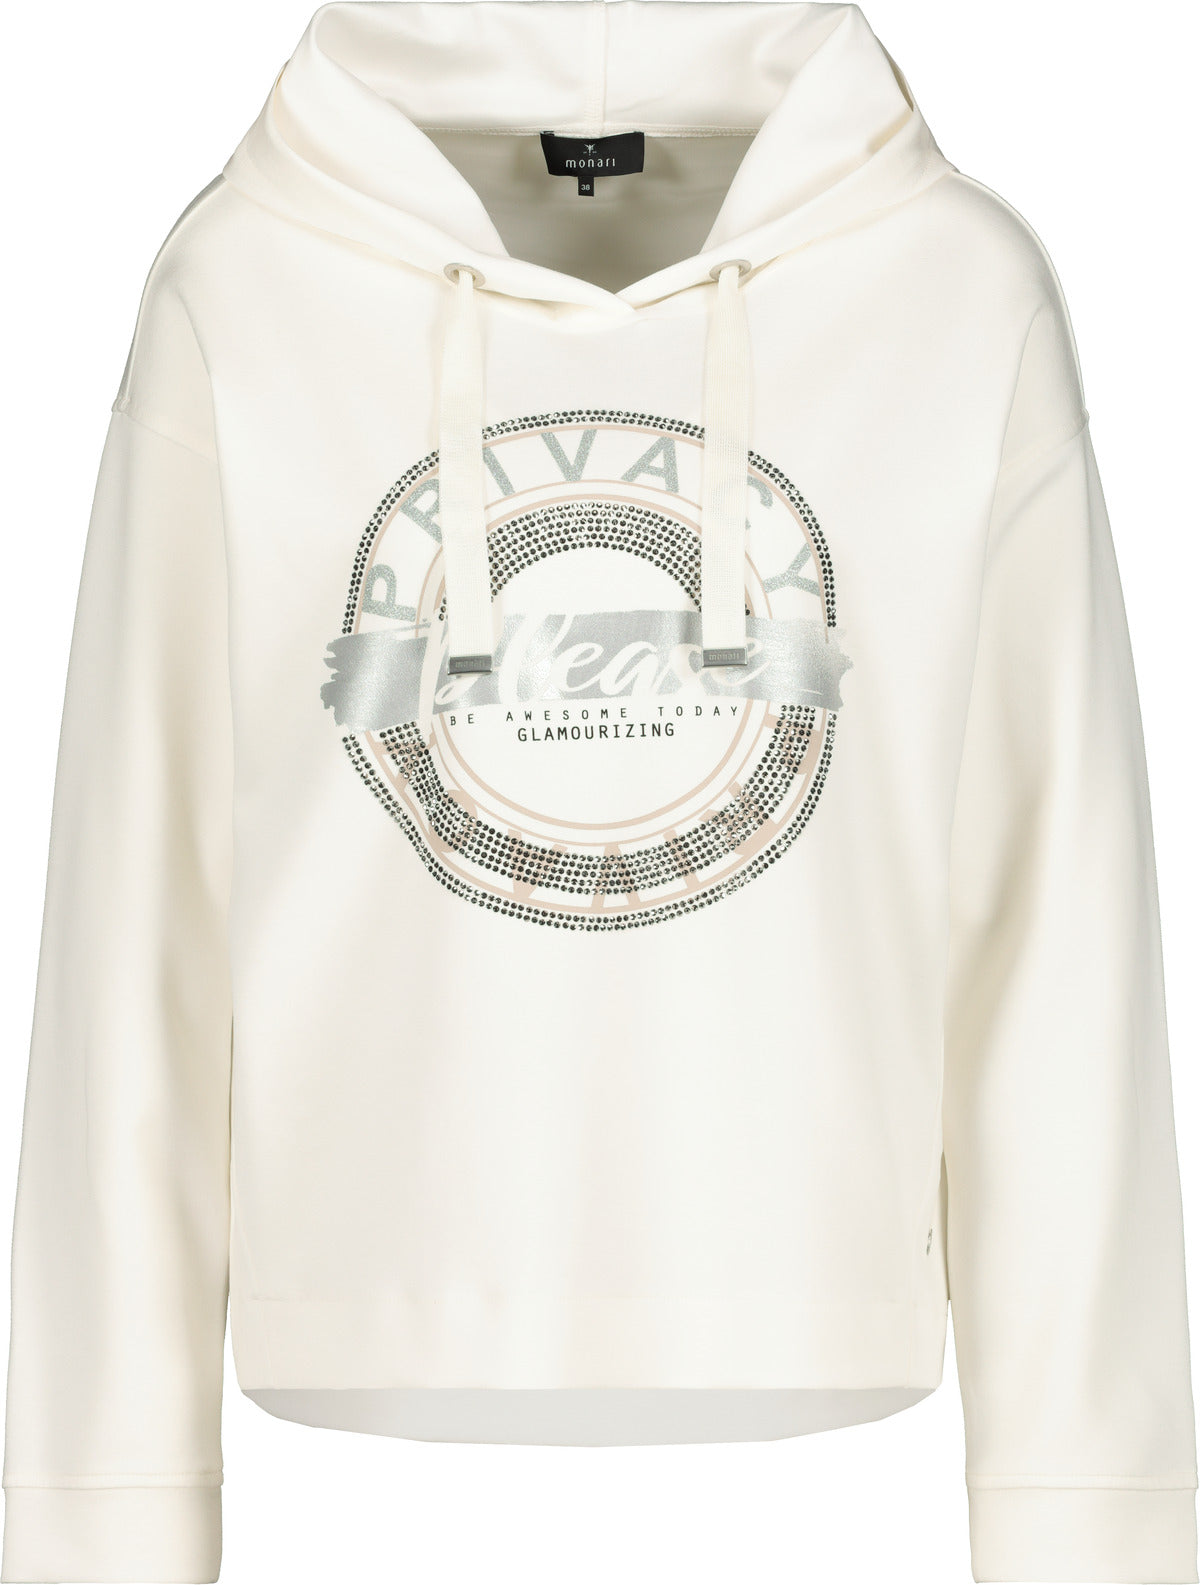 Pullover, off-white